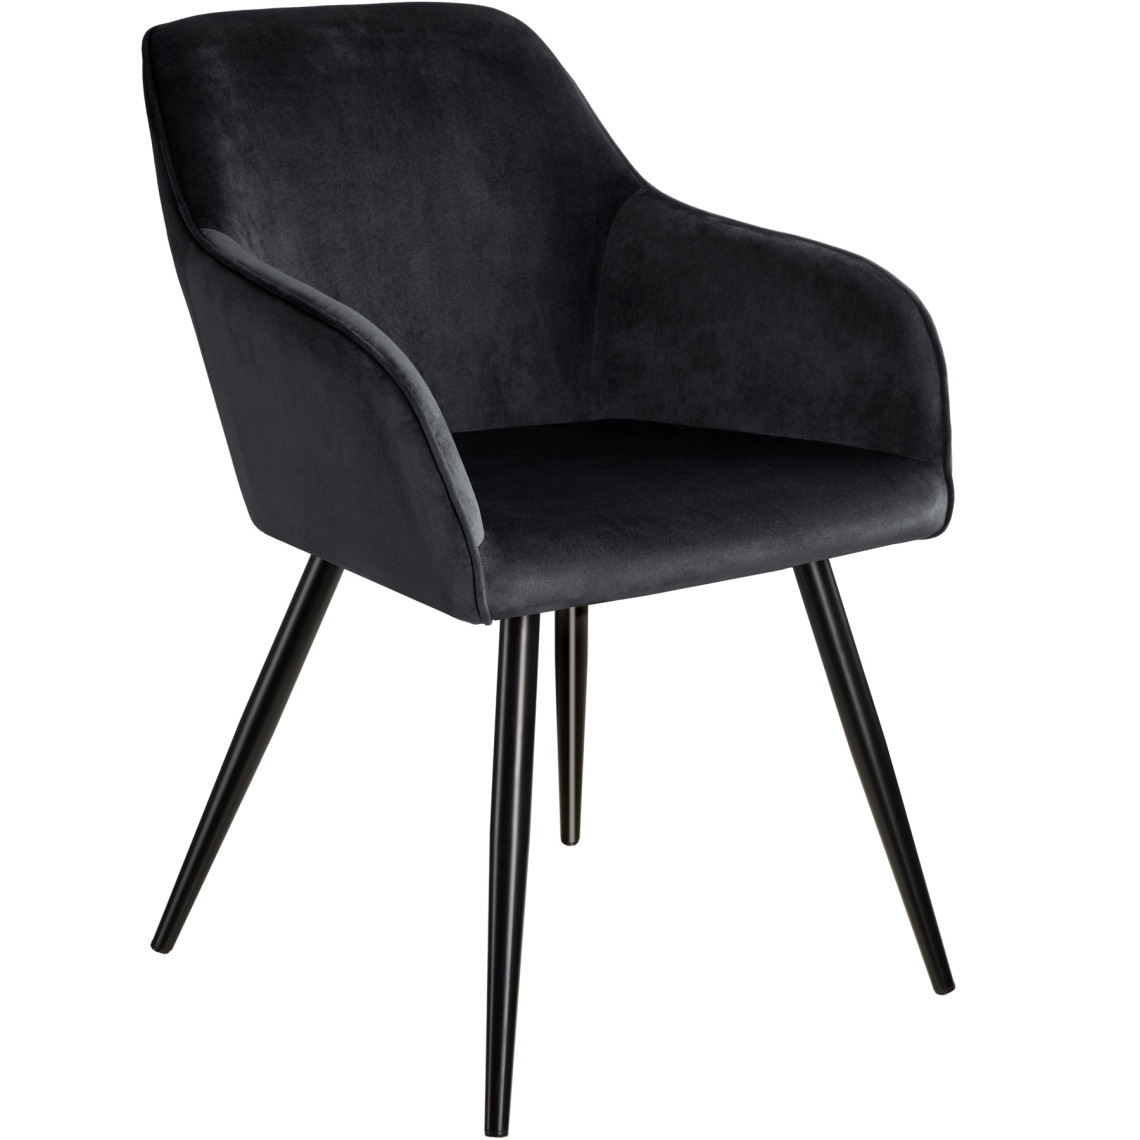 Tectake - Chaise MARILYN Effet Velours Style Scandinave - noir - Chaises